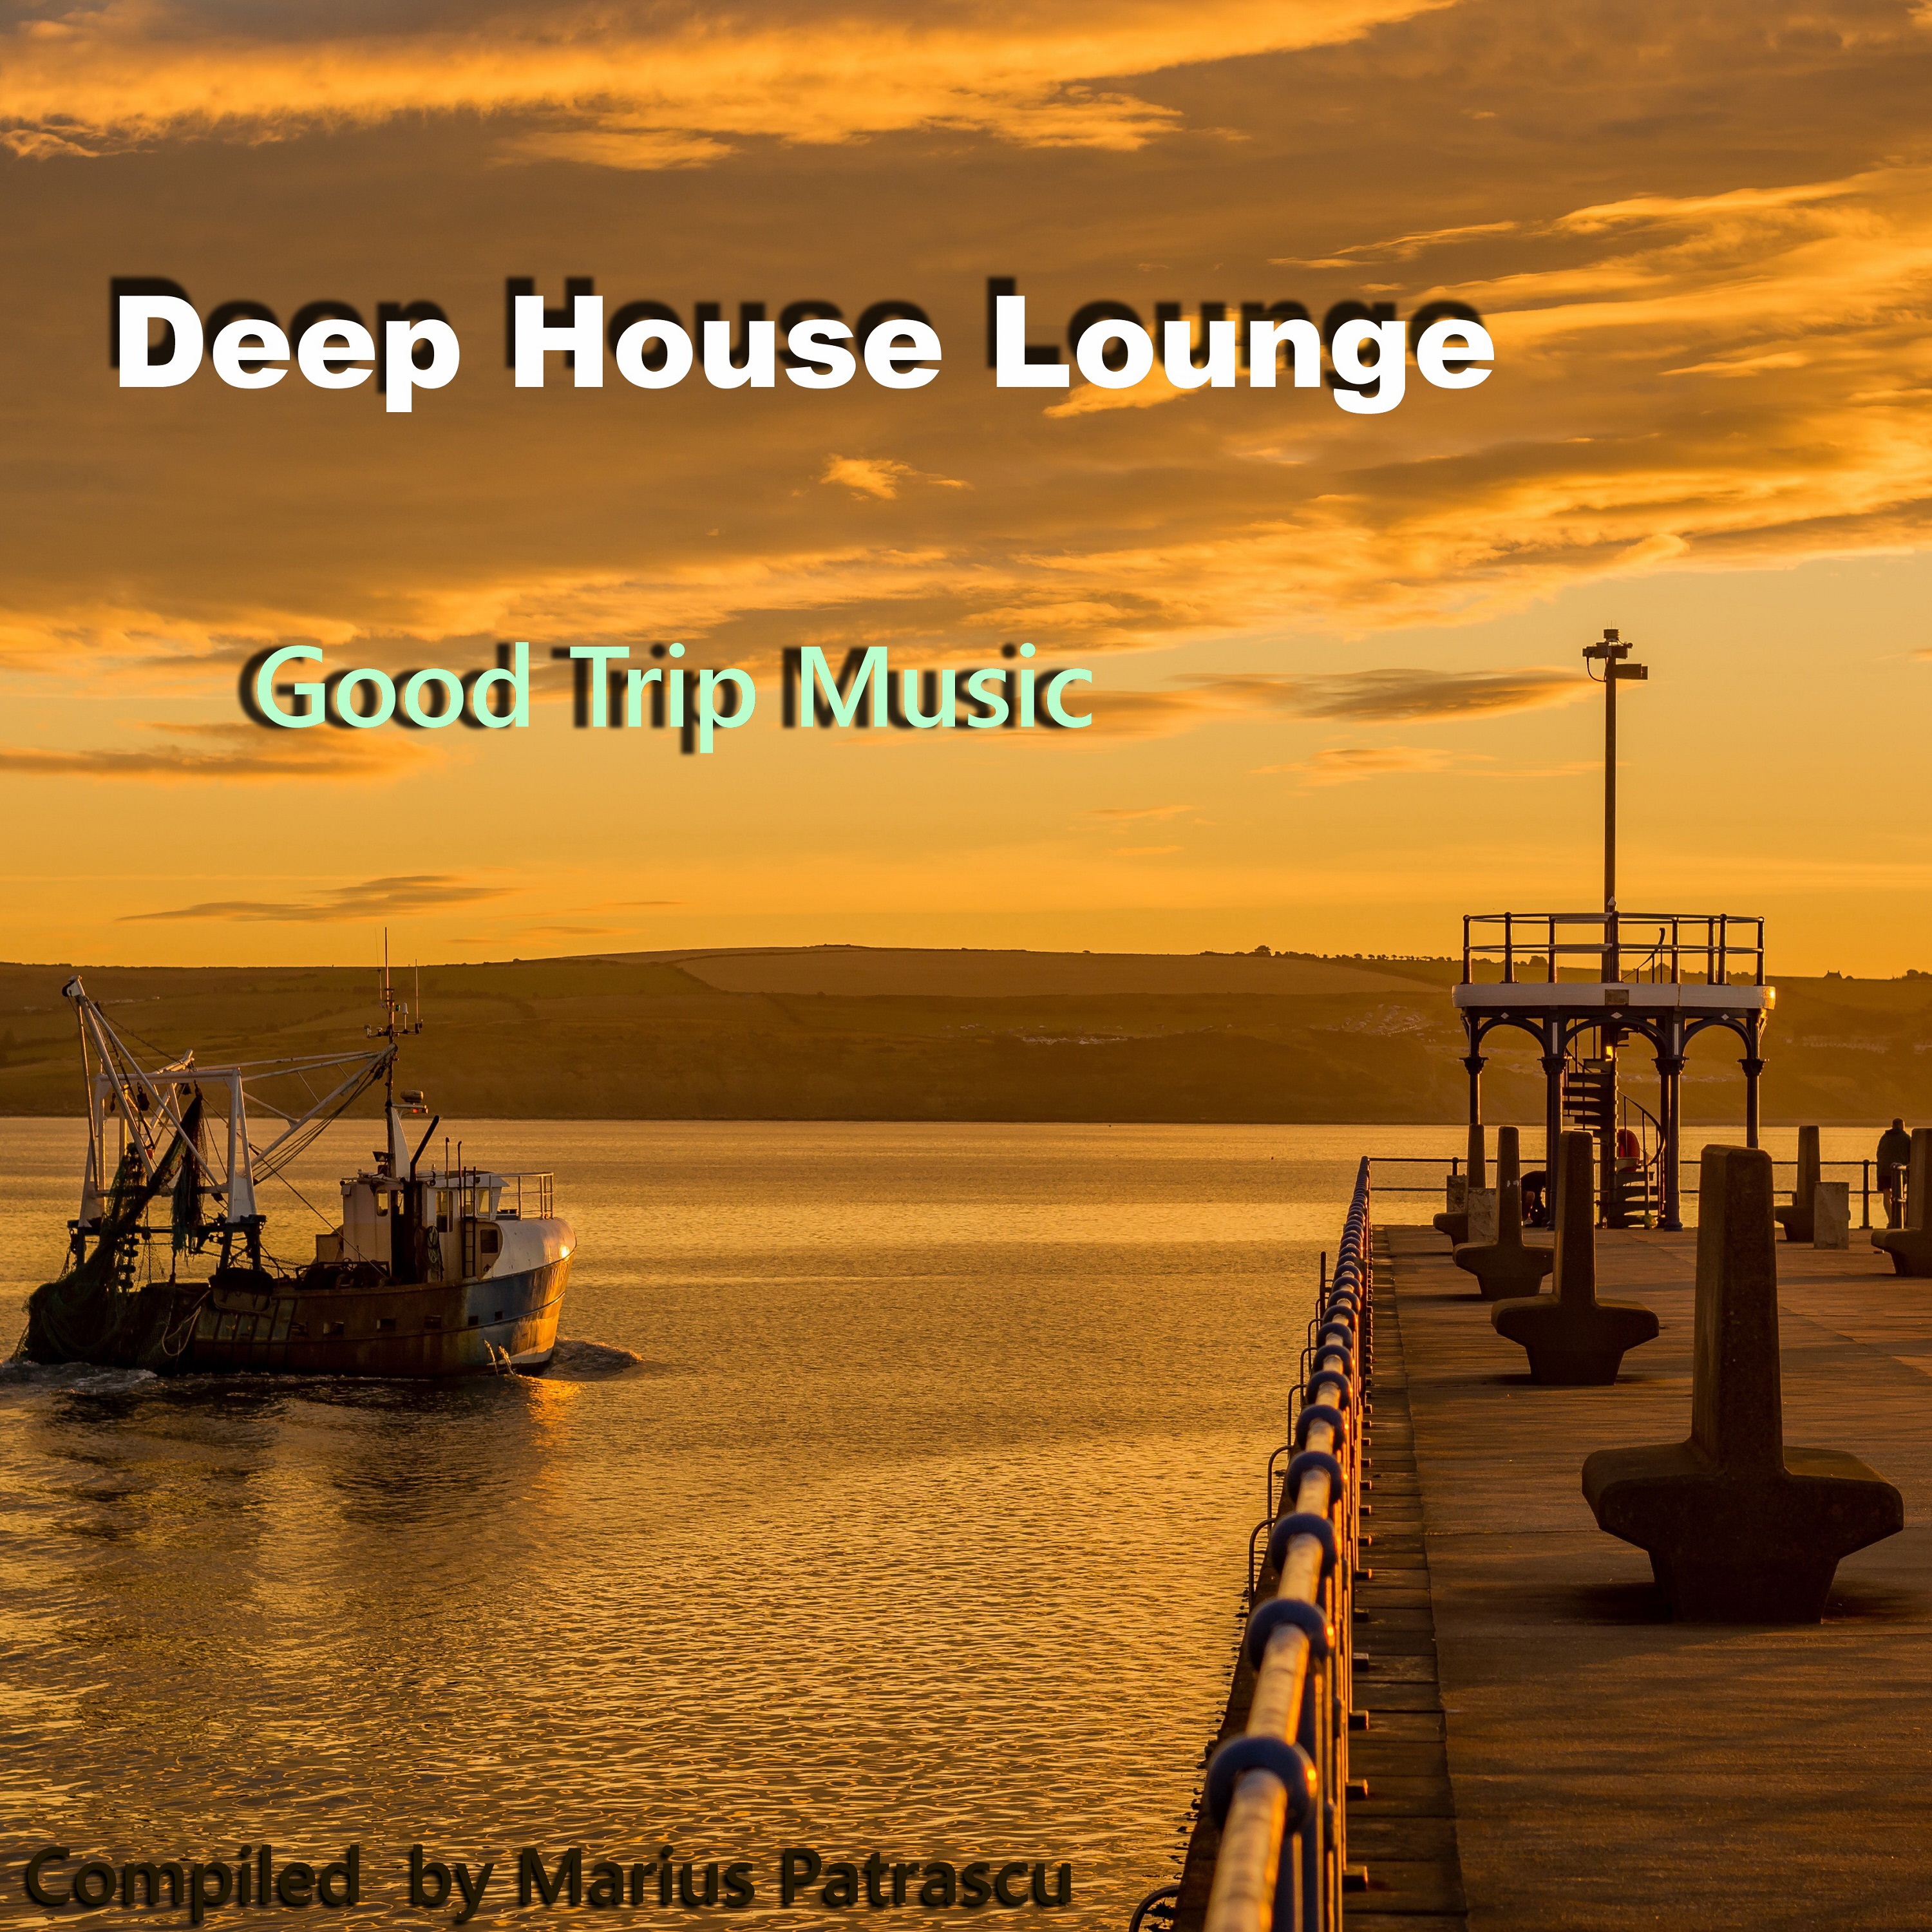 Deep House Lounge Good Trip Music (Compiled and Mixed by Marius Patrascu) [Continuous DJ Mix]